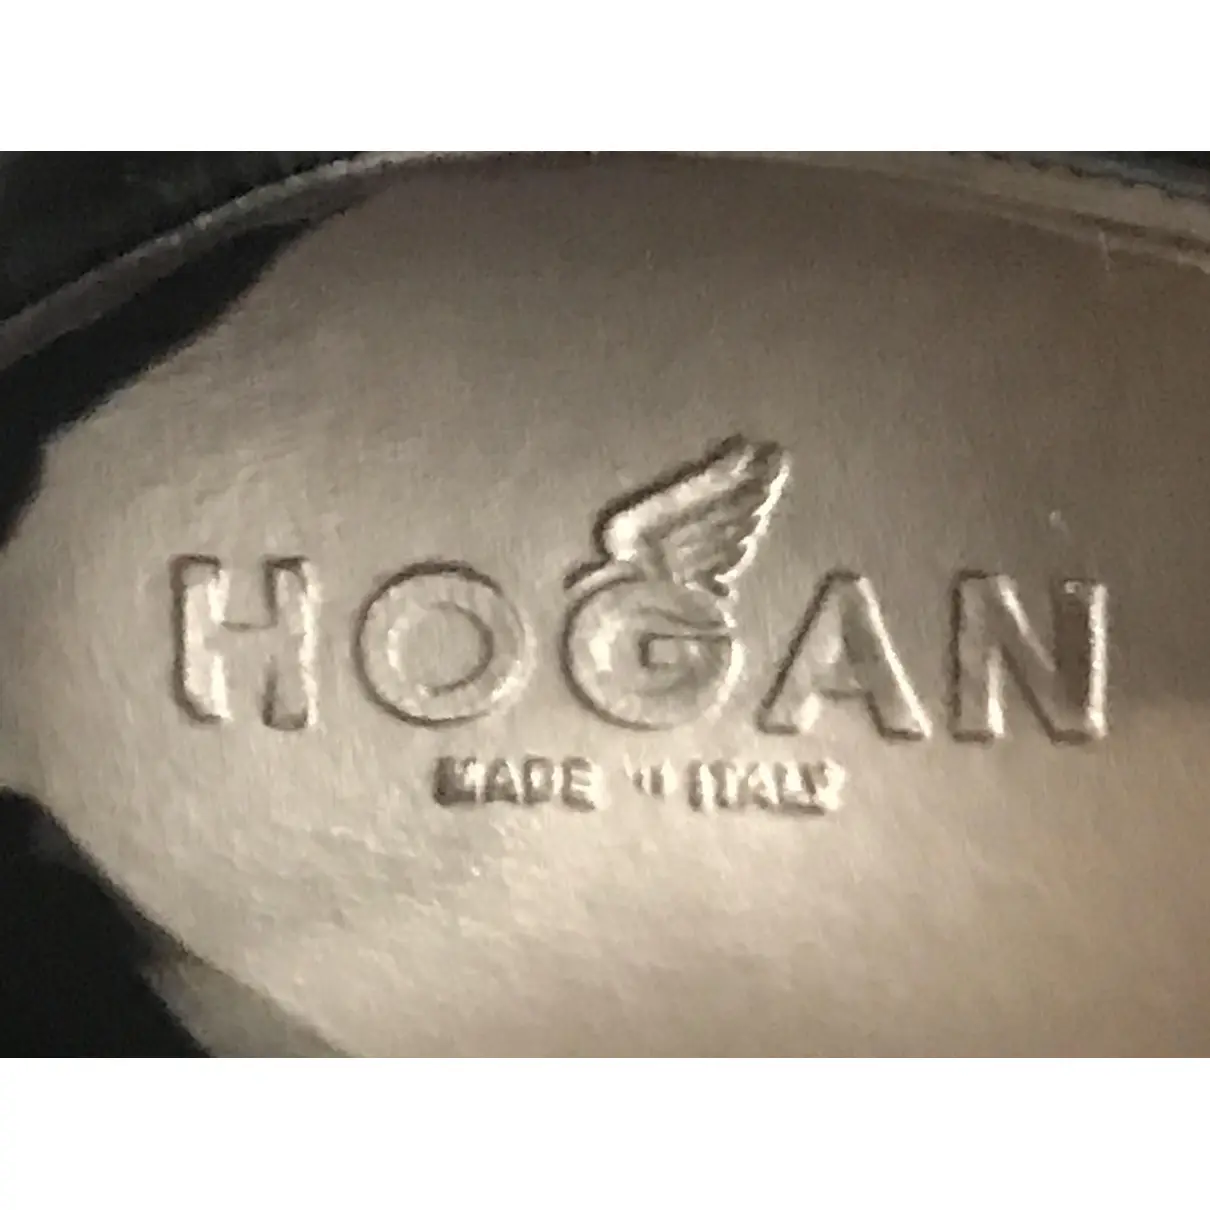 Leather low trainers Hogan